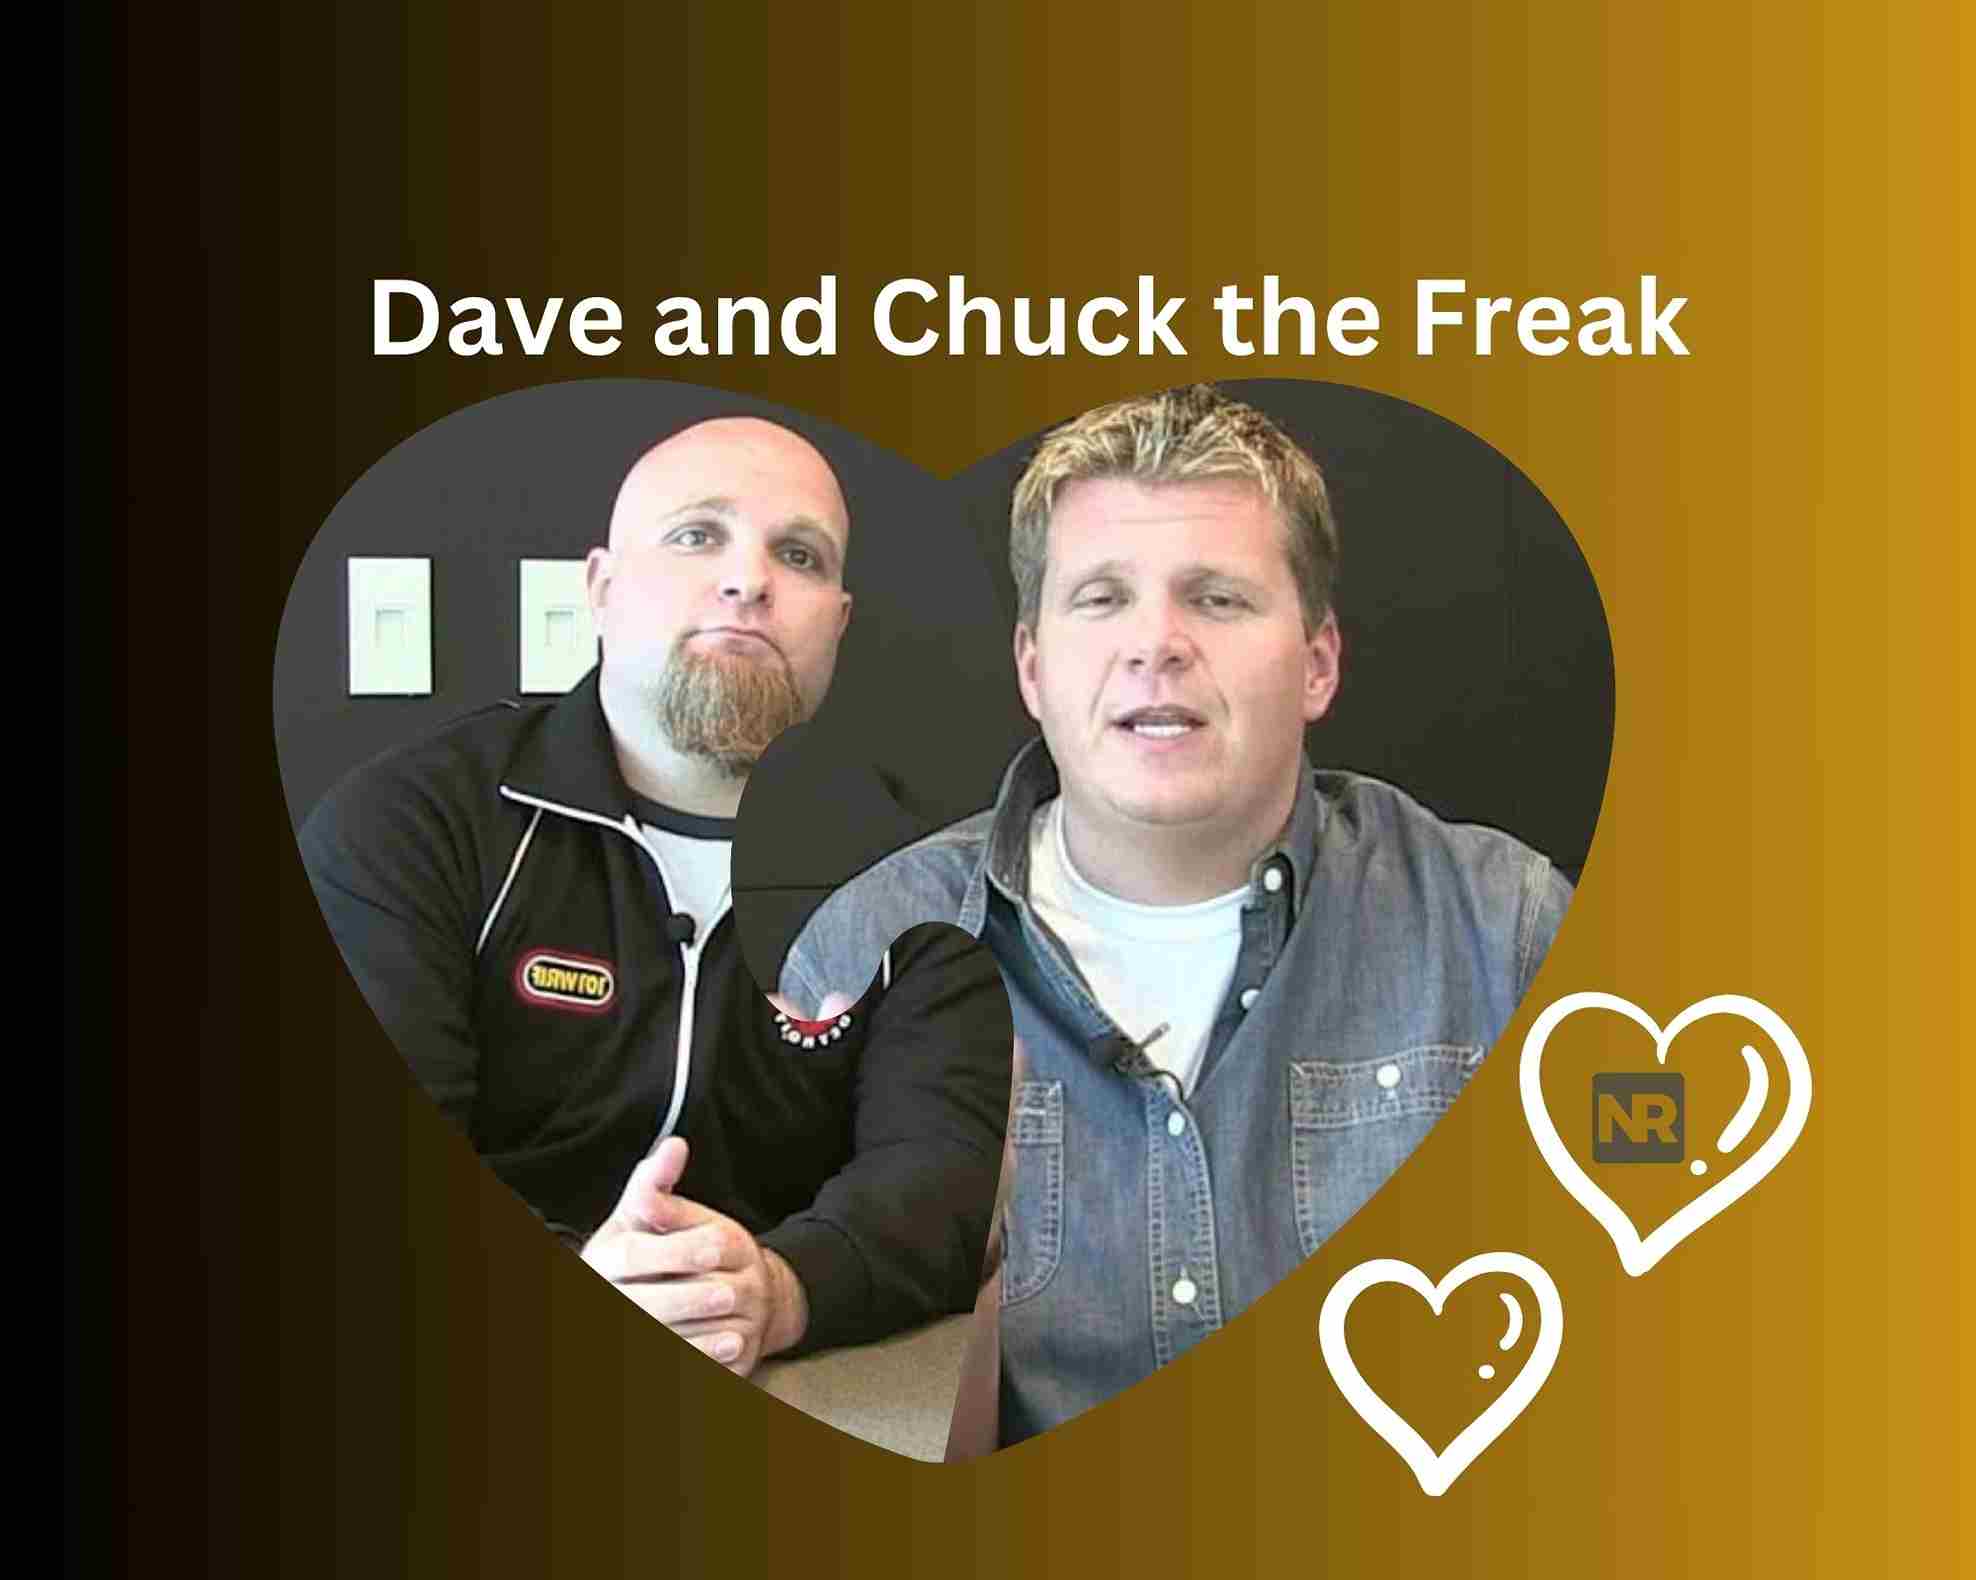 dave-and-chuck-the-freak-making-waves-in-the-comedy-world